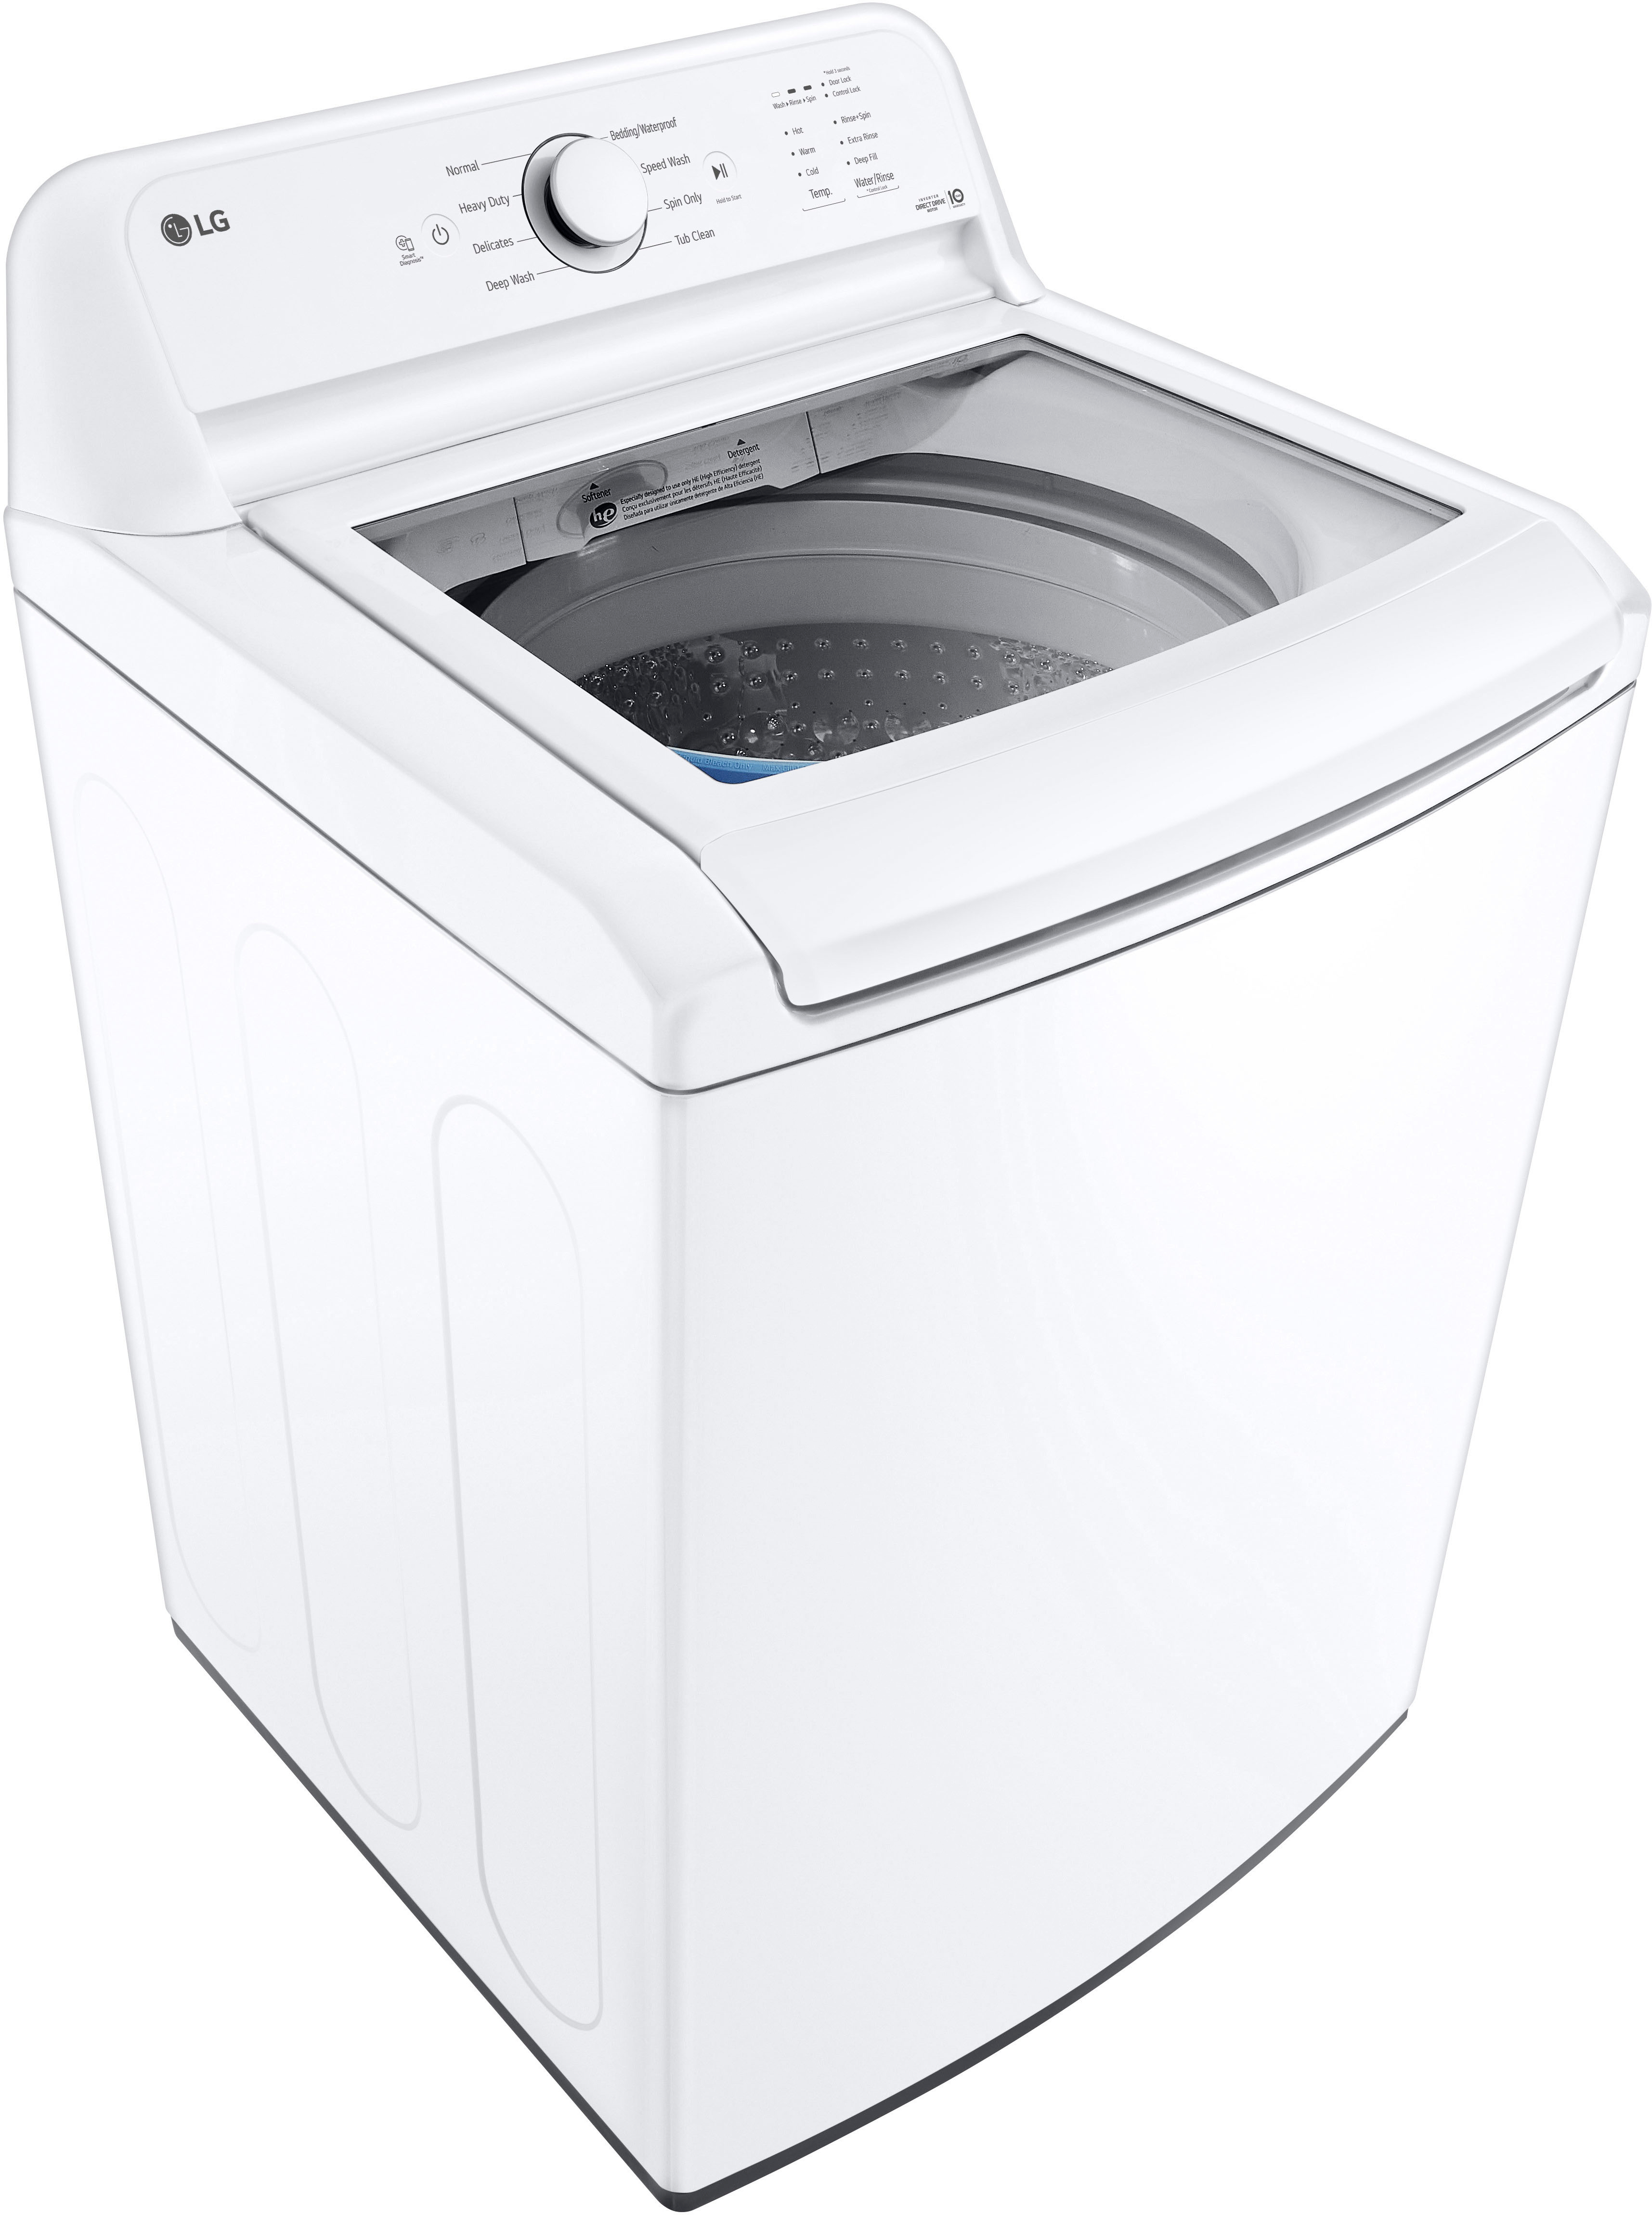 Angle View: Amana - 3.5 Cu. Ft. High Efficiency Top Load Washer with Dual Action Agitator - White